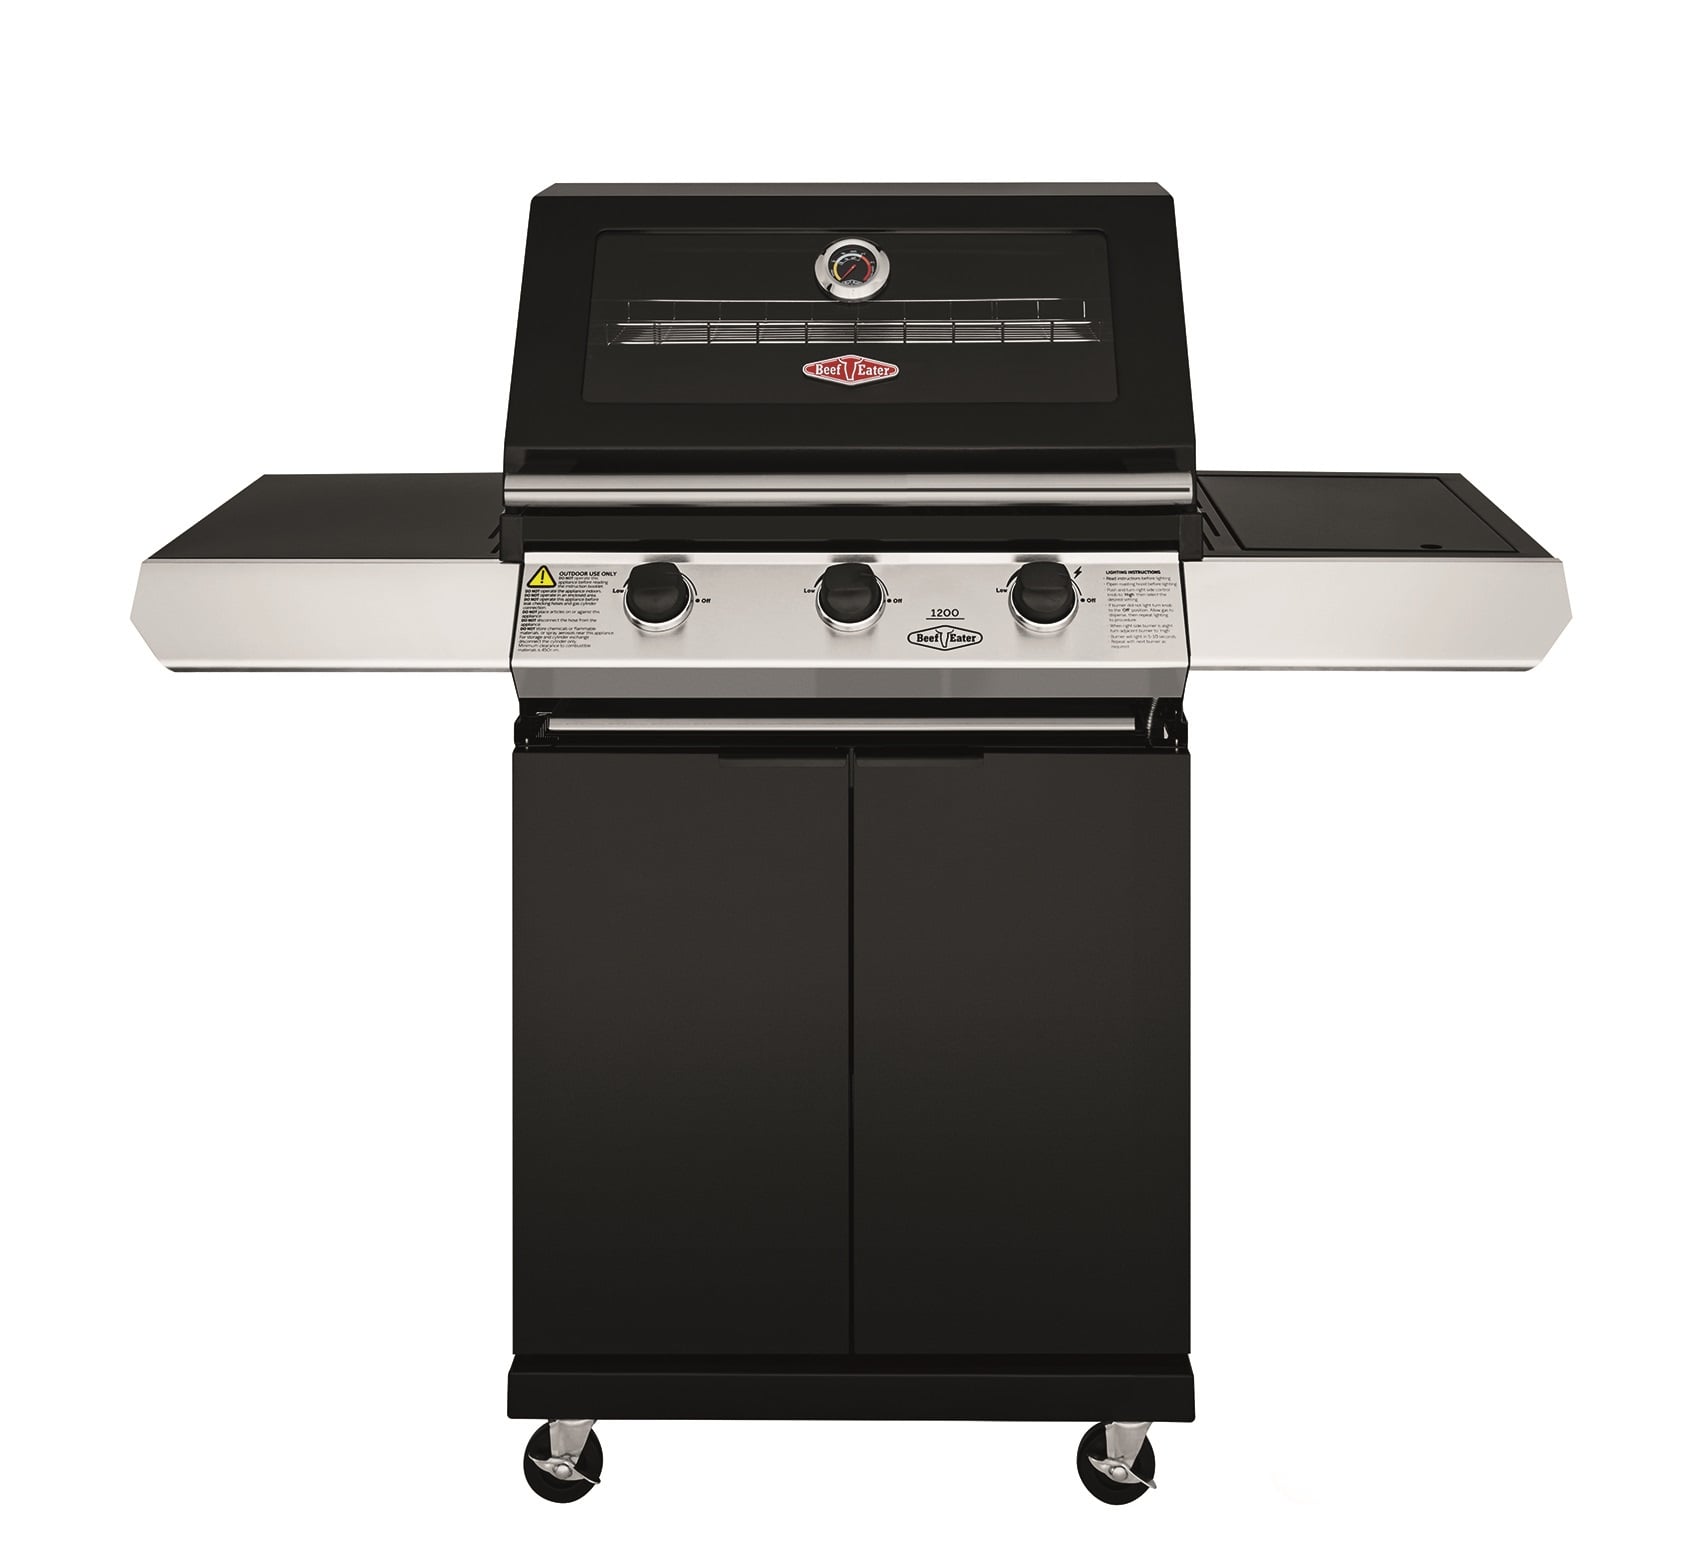 BeefEater 1200E Series - 3 Burner Gas Barbecue and Trolley